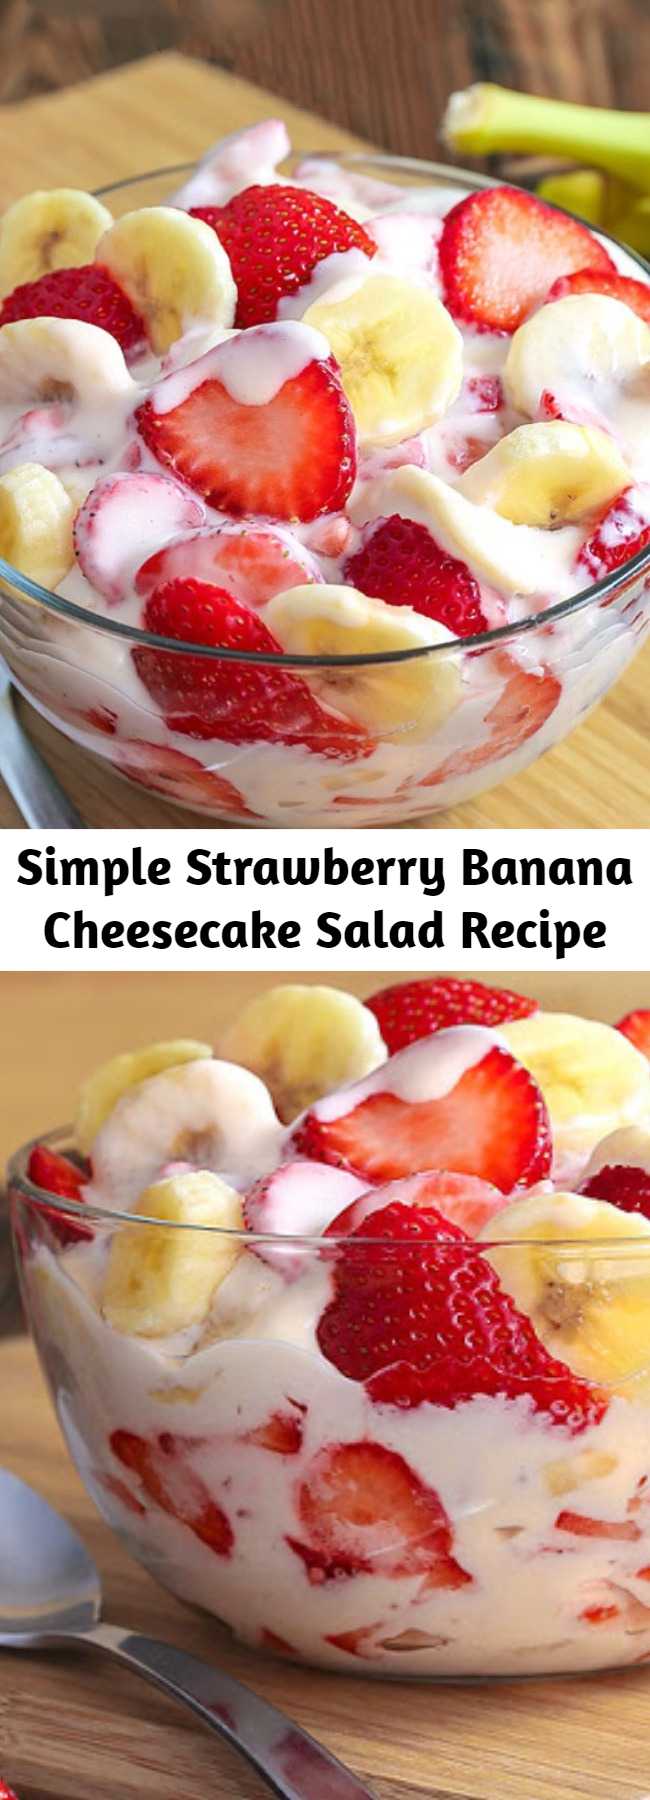 Simple Strawberry Banana Cheesecake Salad Recipe - Simple Strawberry Banana Cheesecake Salad recipe comes together with just 6 ingredients. Rich and creamy cheesecake filling is folded into luscious strawberries and sweet banana to create the most amazing, glorious fruit salad ever! #strawberries #potluckfood